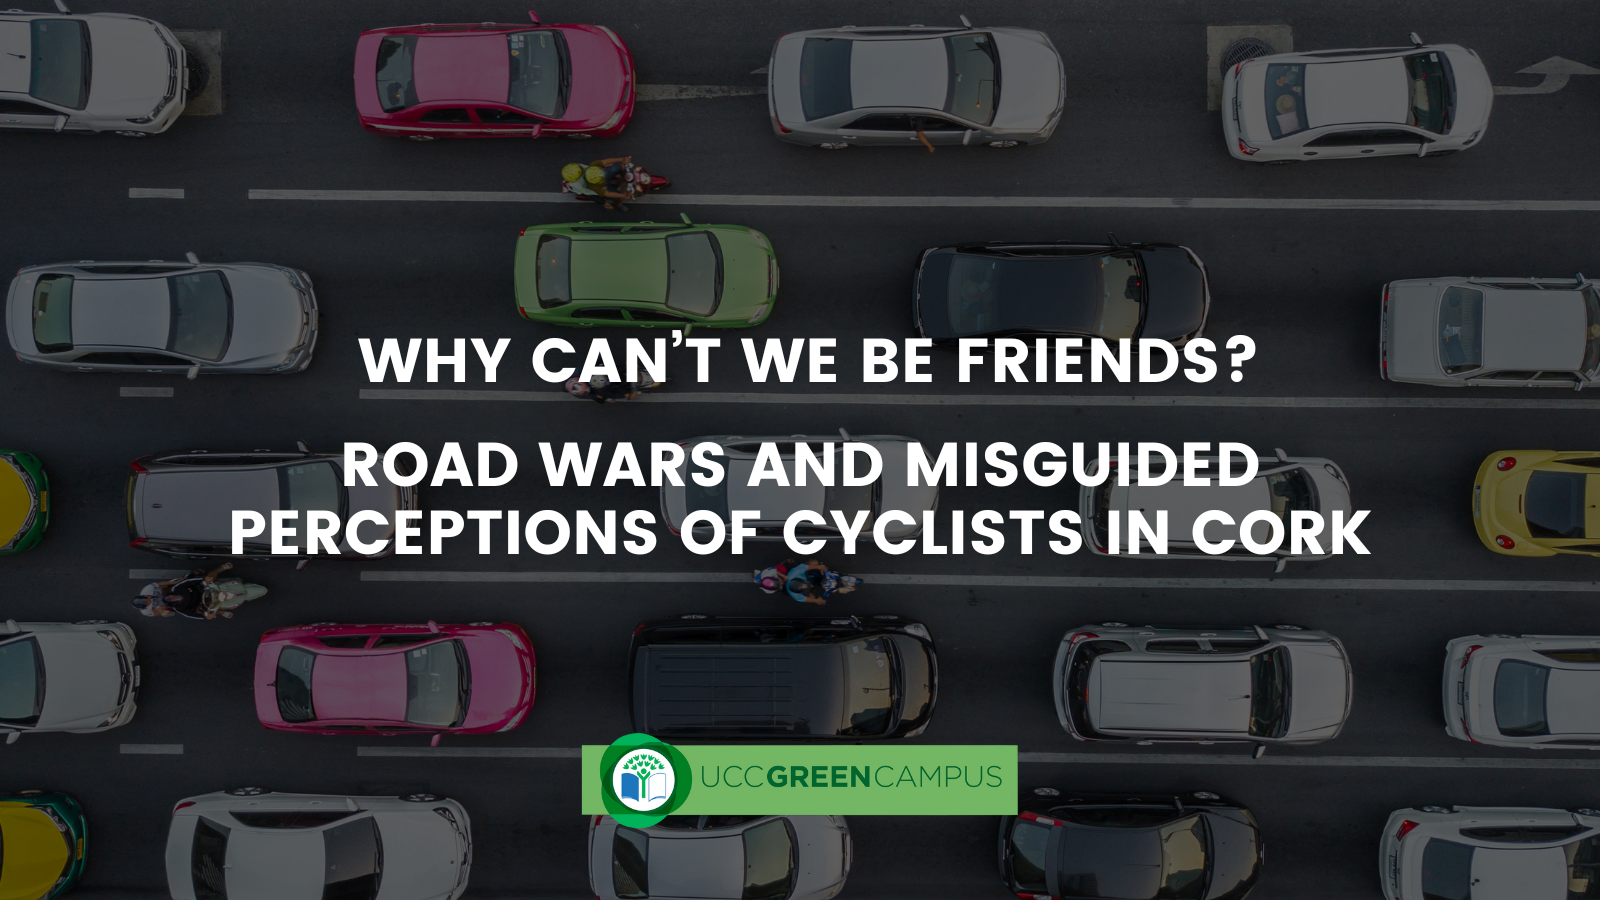 Why Can’t We Be Friends? Road Wars and Misguided Perceptions of Cyclists in Cork